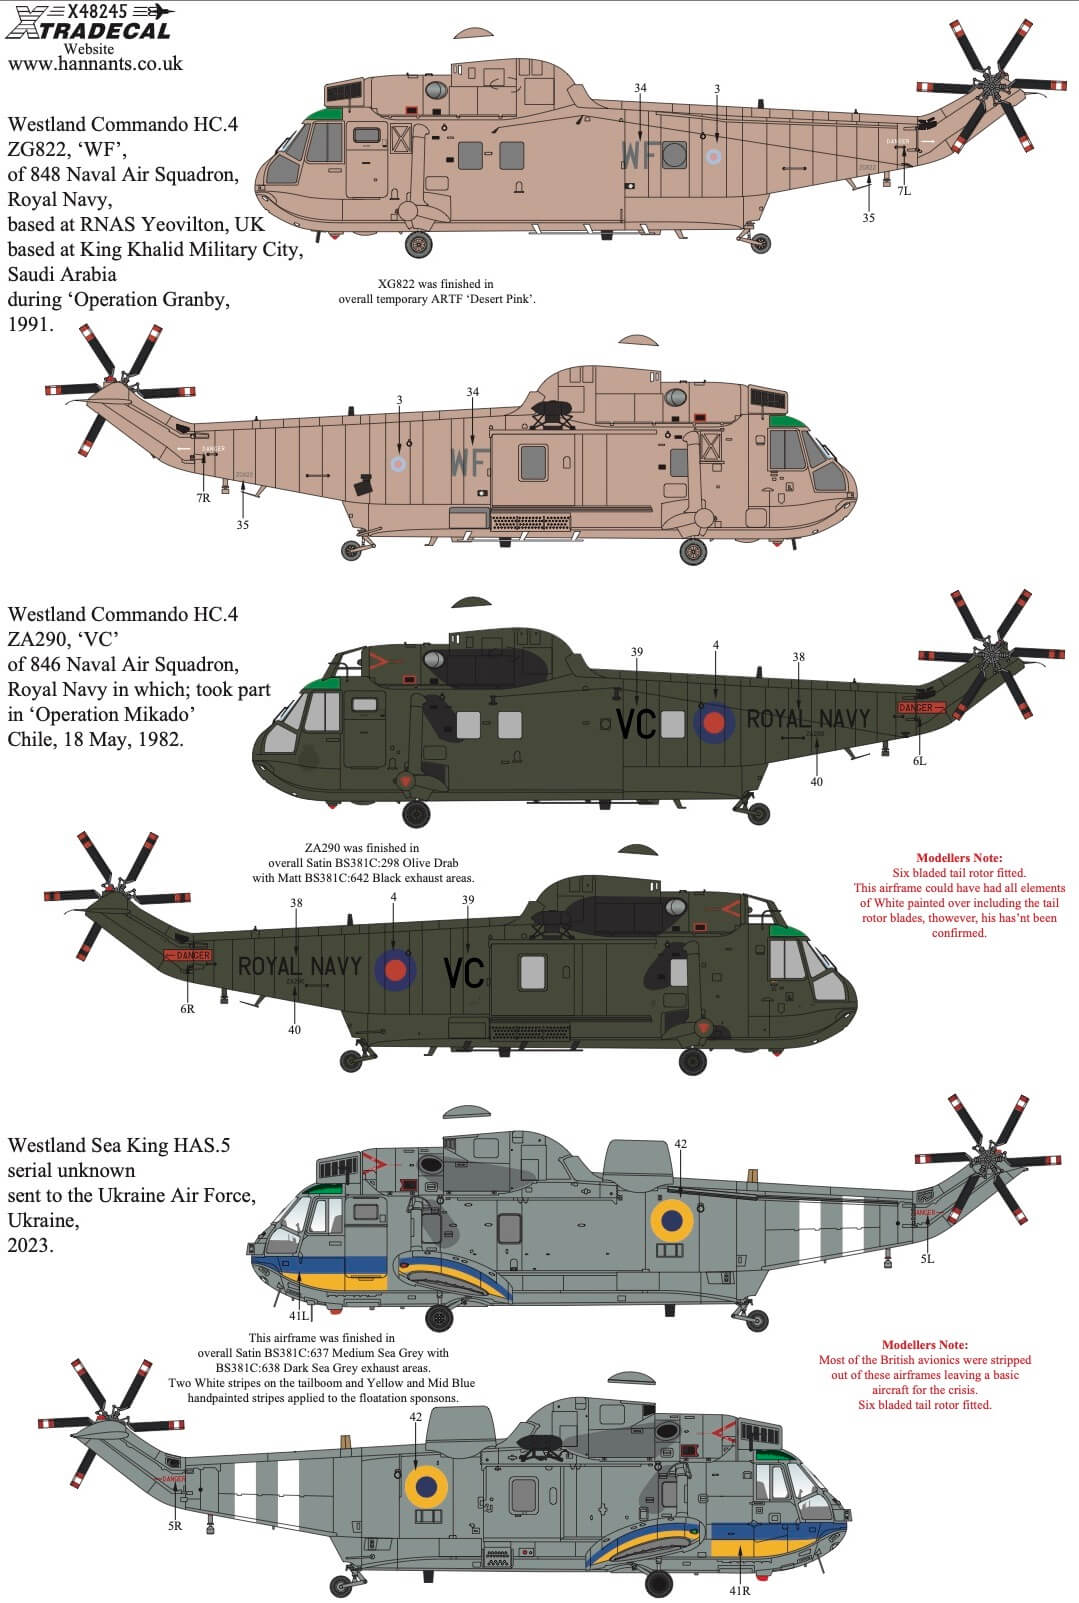 1:48 Westland Sea King Collection Pt3 X48245 Xtradecal